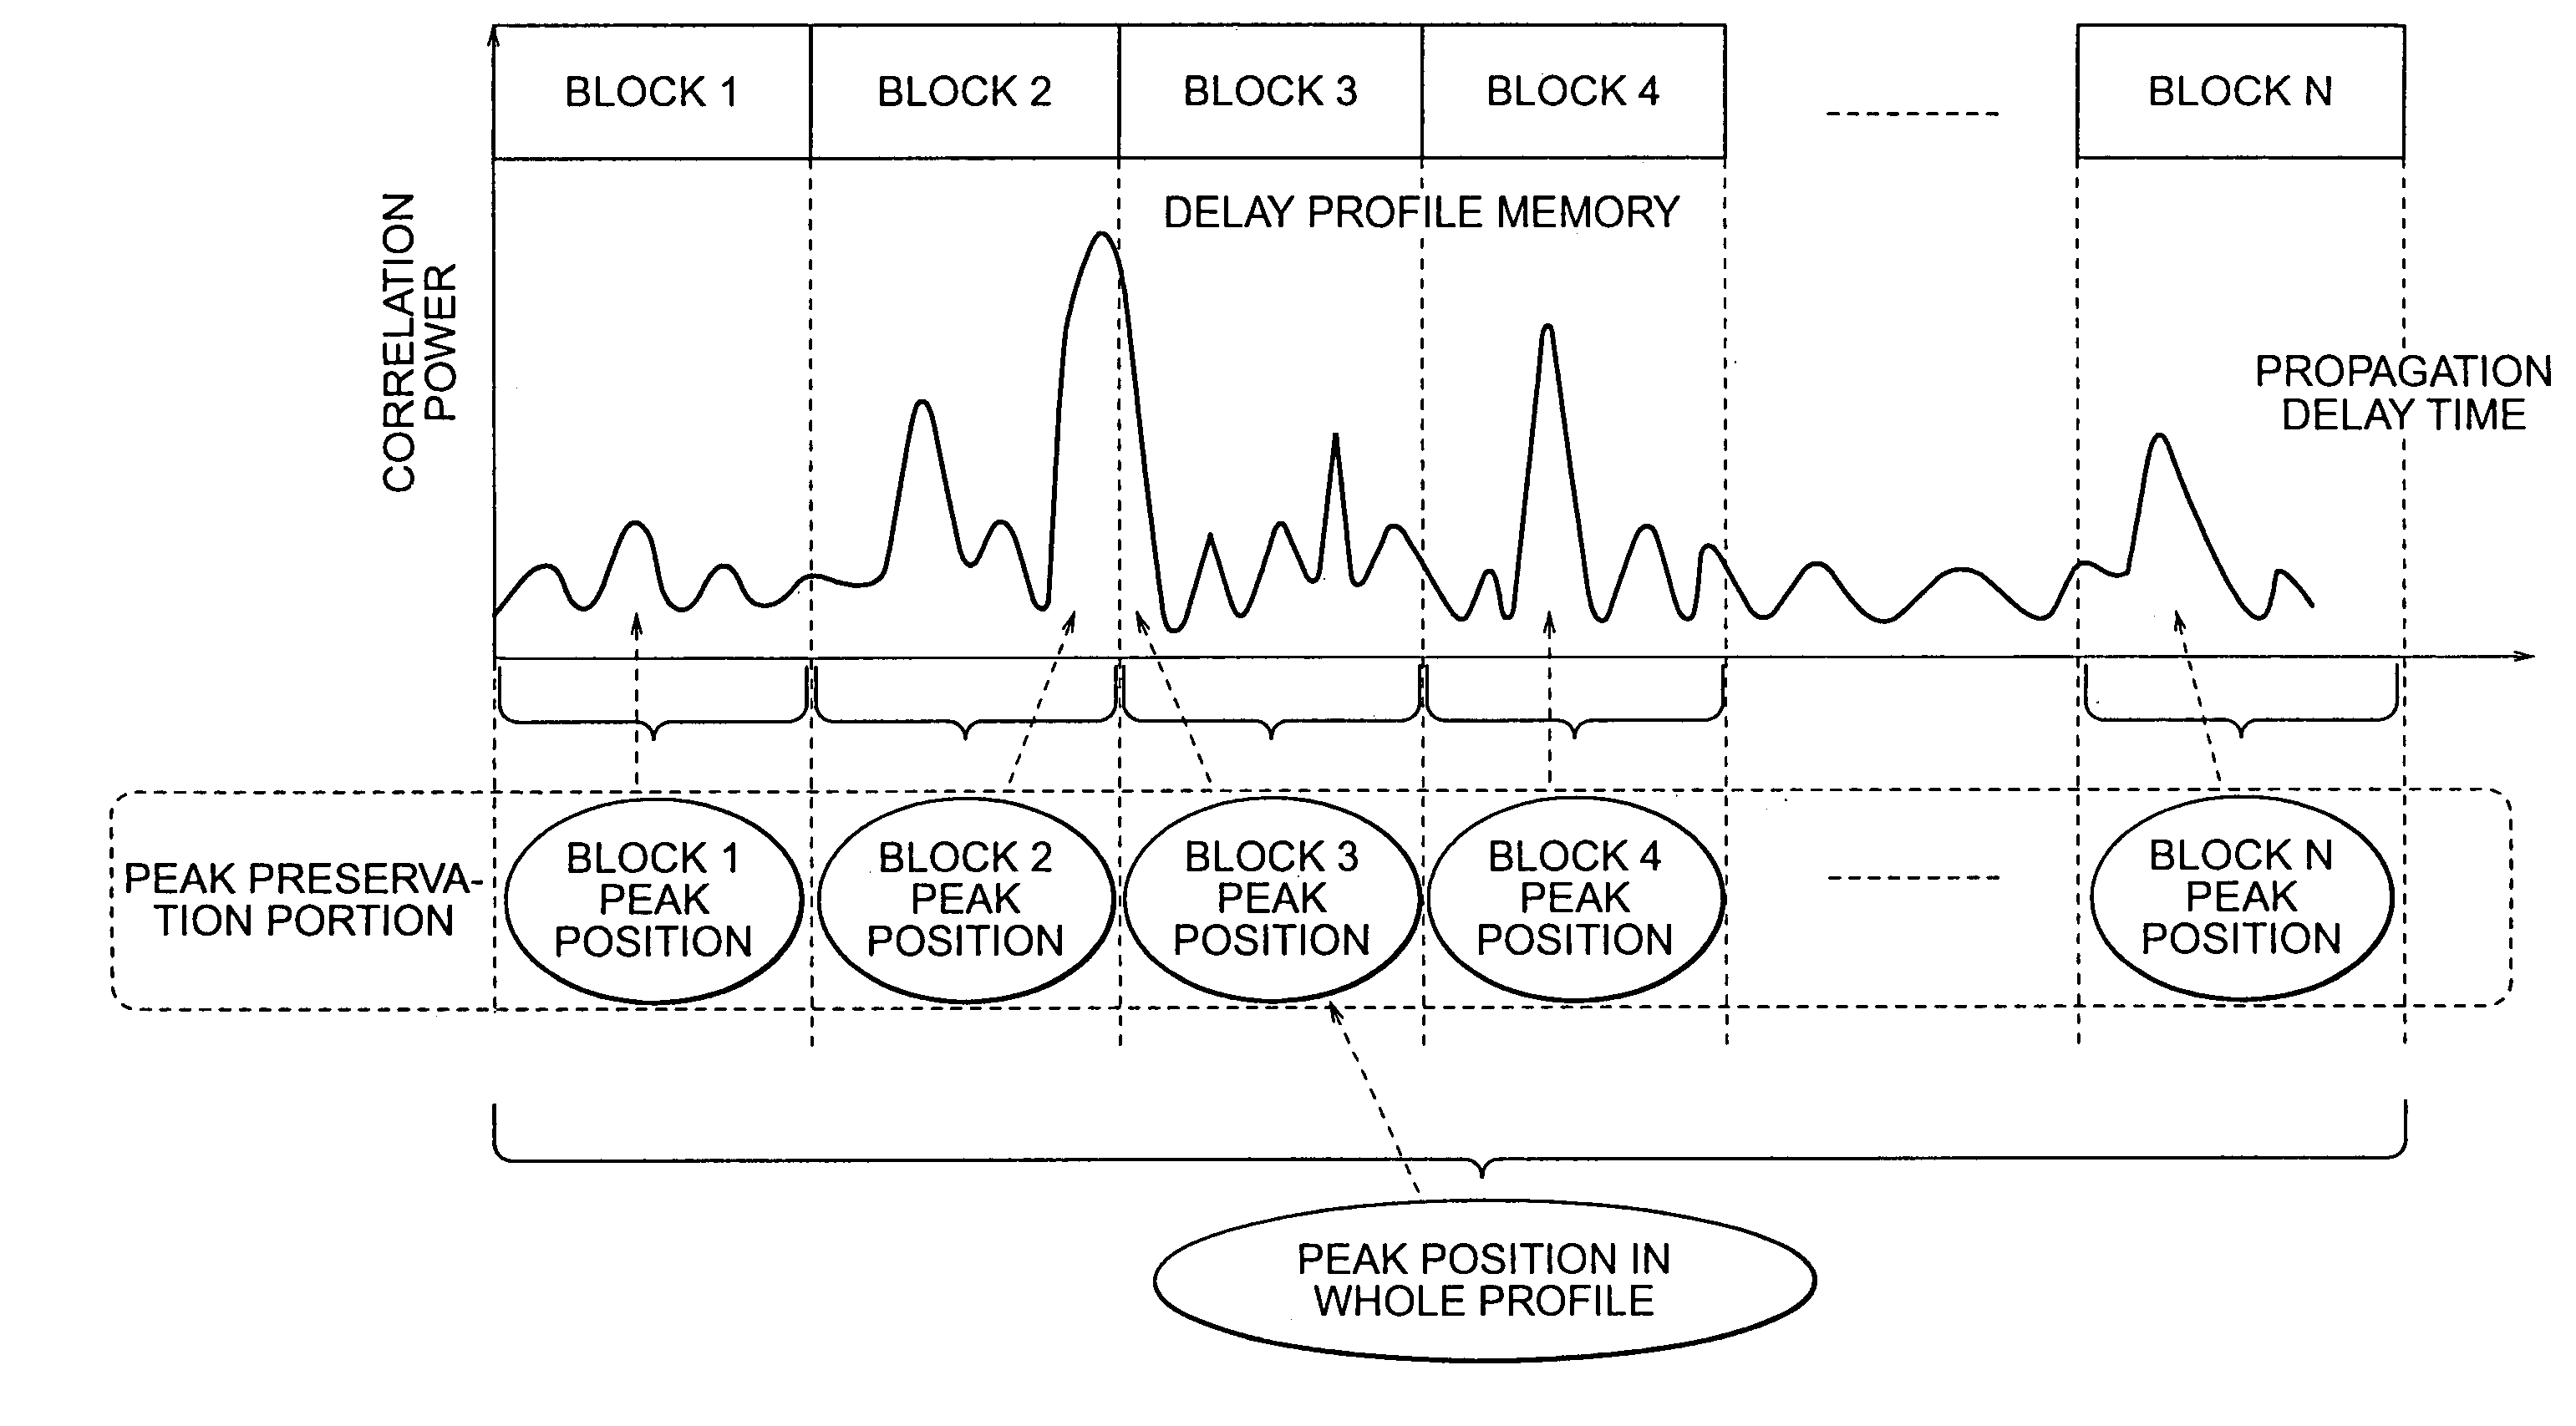 Multi-path detection circuit and method for a CDMA receiver